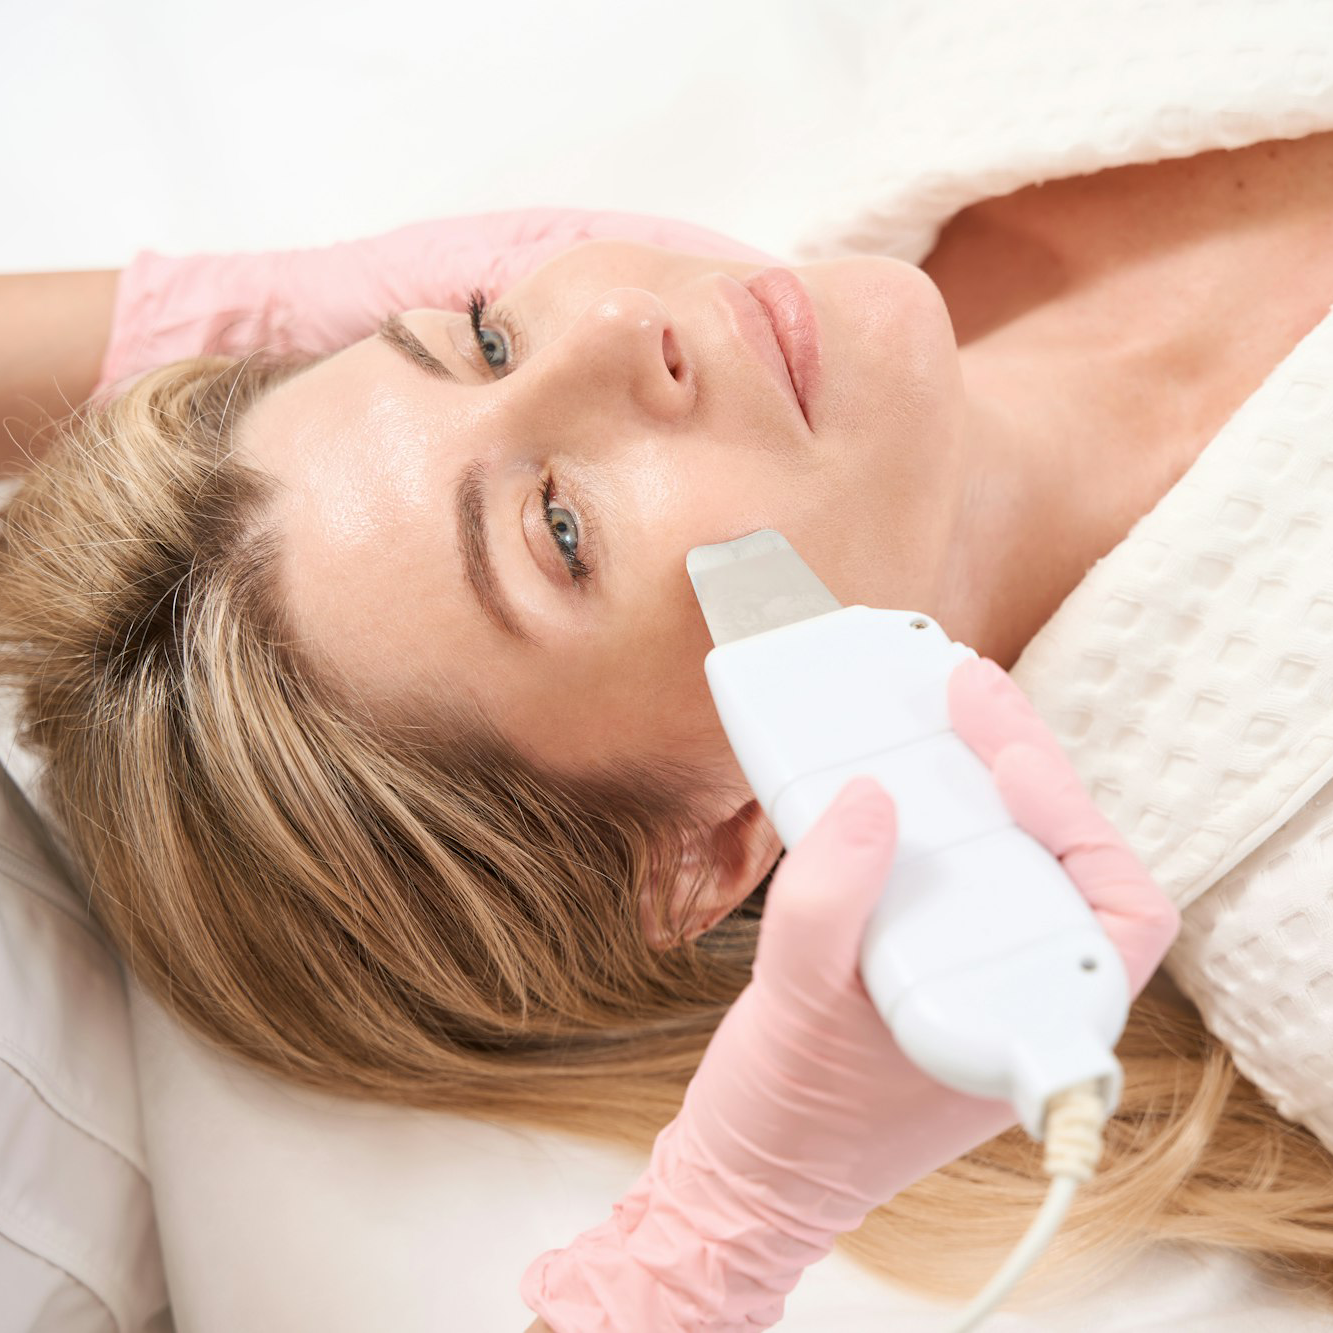 Woman on the procedure of ultrasonic facial cleansing